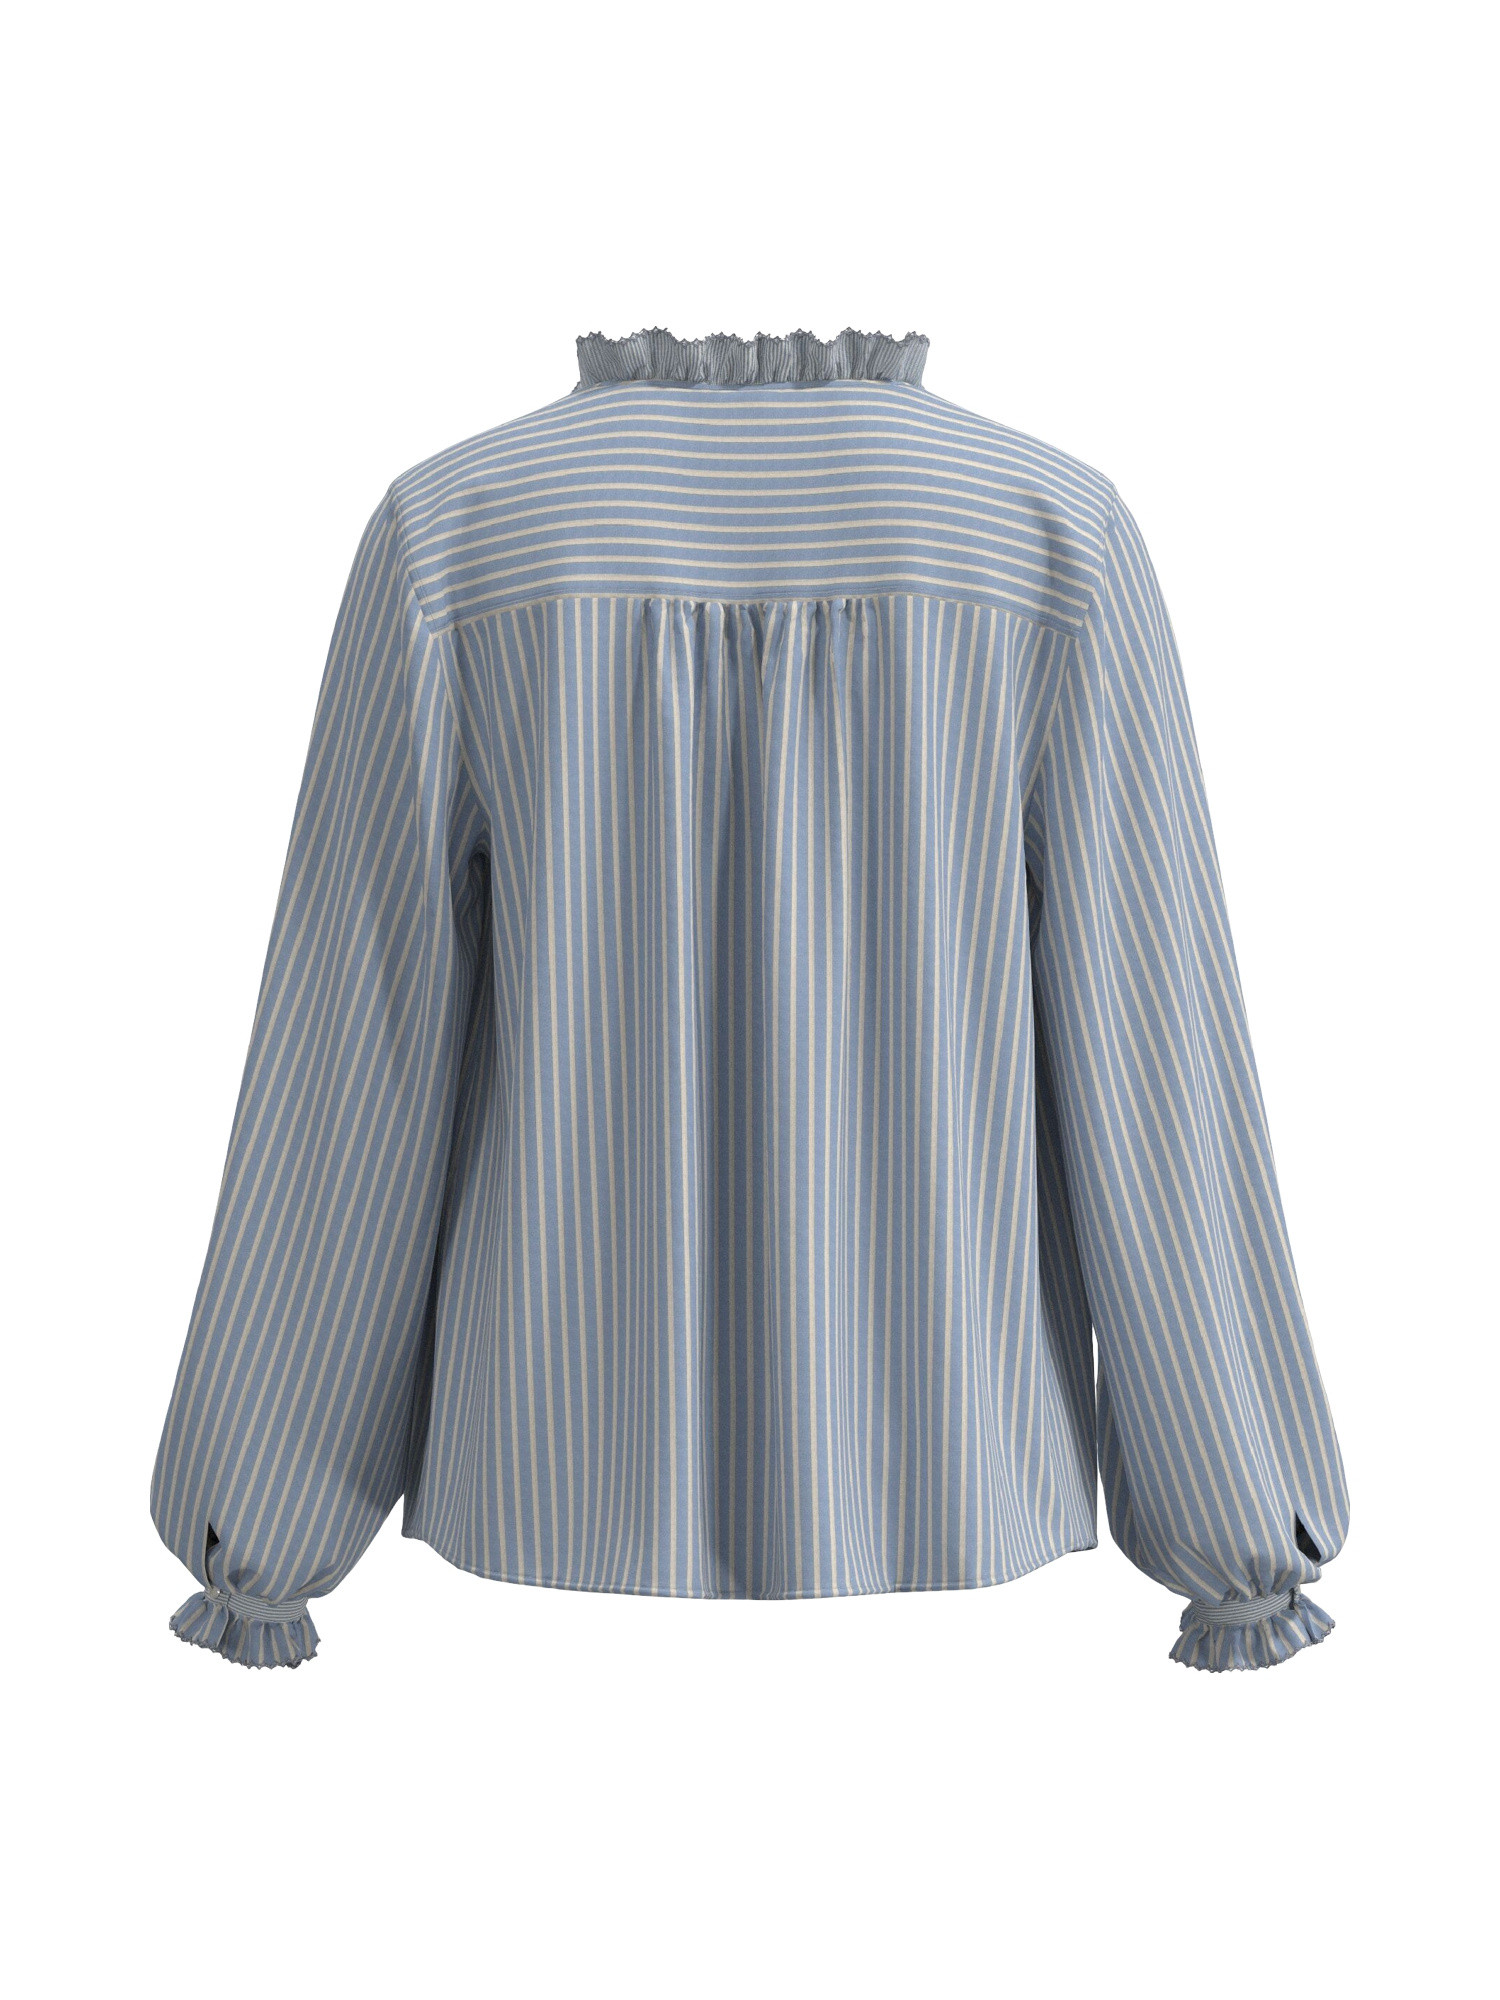 Pepe Jeans -  Camicia a righe in cotone, Azzurro, large image number 1